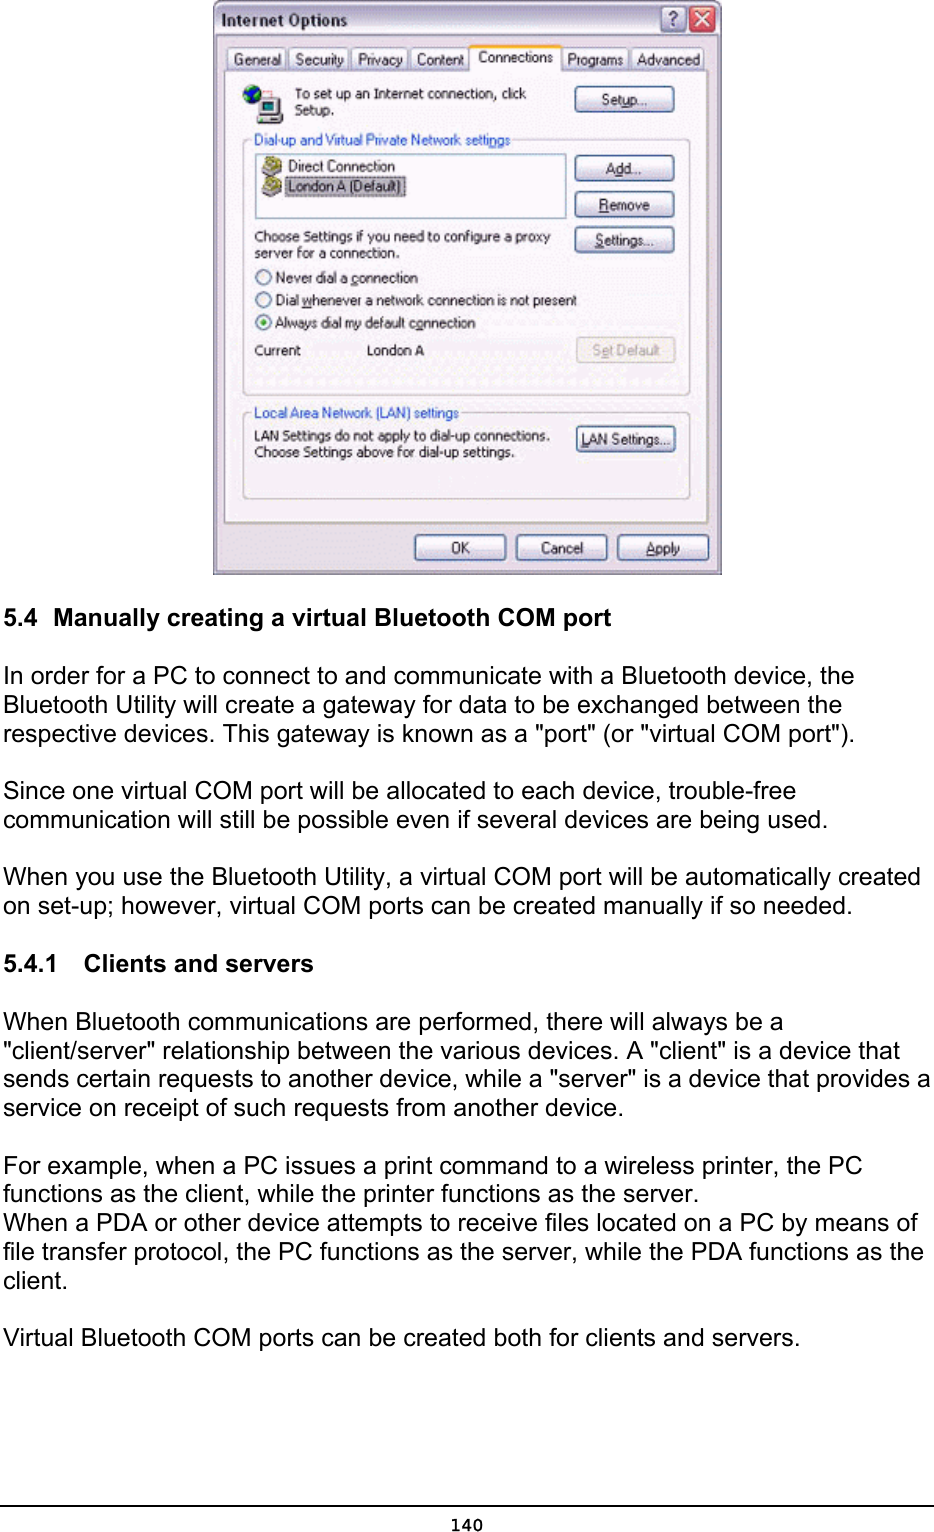   5.4  Manually creating a virtual Bluetooth COM port In order for a PC to connect to and communicate with a Bluetooth device, the Bluetooth Utility will create a gateway for data to be exchanged between the respective devices. This gateway is known as a &quot;port&quot; (or &quot;virtual COM port&quot;).  Since one virtual COM port will be allocated to each device, trouble-free communication will still be possible even if several devices are being used.  When you use the Bluetooth Utility, a virtual COM port will be automatically created on set-up; however, virtual COM ports can be created manually if so needed. 5.4.1    Clients and servers When Bluetooth communications are performed, there will always be a &quot;client/server&quot; relationship between the various devices. A &quot;client&quot; is a device that sends certain requests to another device, while a &quot;server&quot; is a device that provides a service on receipt of such requests from another device.    For example, when a PC issues a print command to a wireless printer, the PC functions as the client, while the printer functions as the server. When a PDA or other device attempts to receive files located on a PC by means of file transfer protocol, the PC functions as the server, while the PDA functions as the client.  Virtual Bluetooth COM ports can be created both for clients and servers.    140